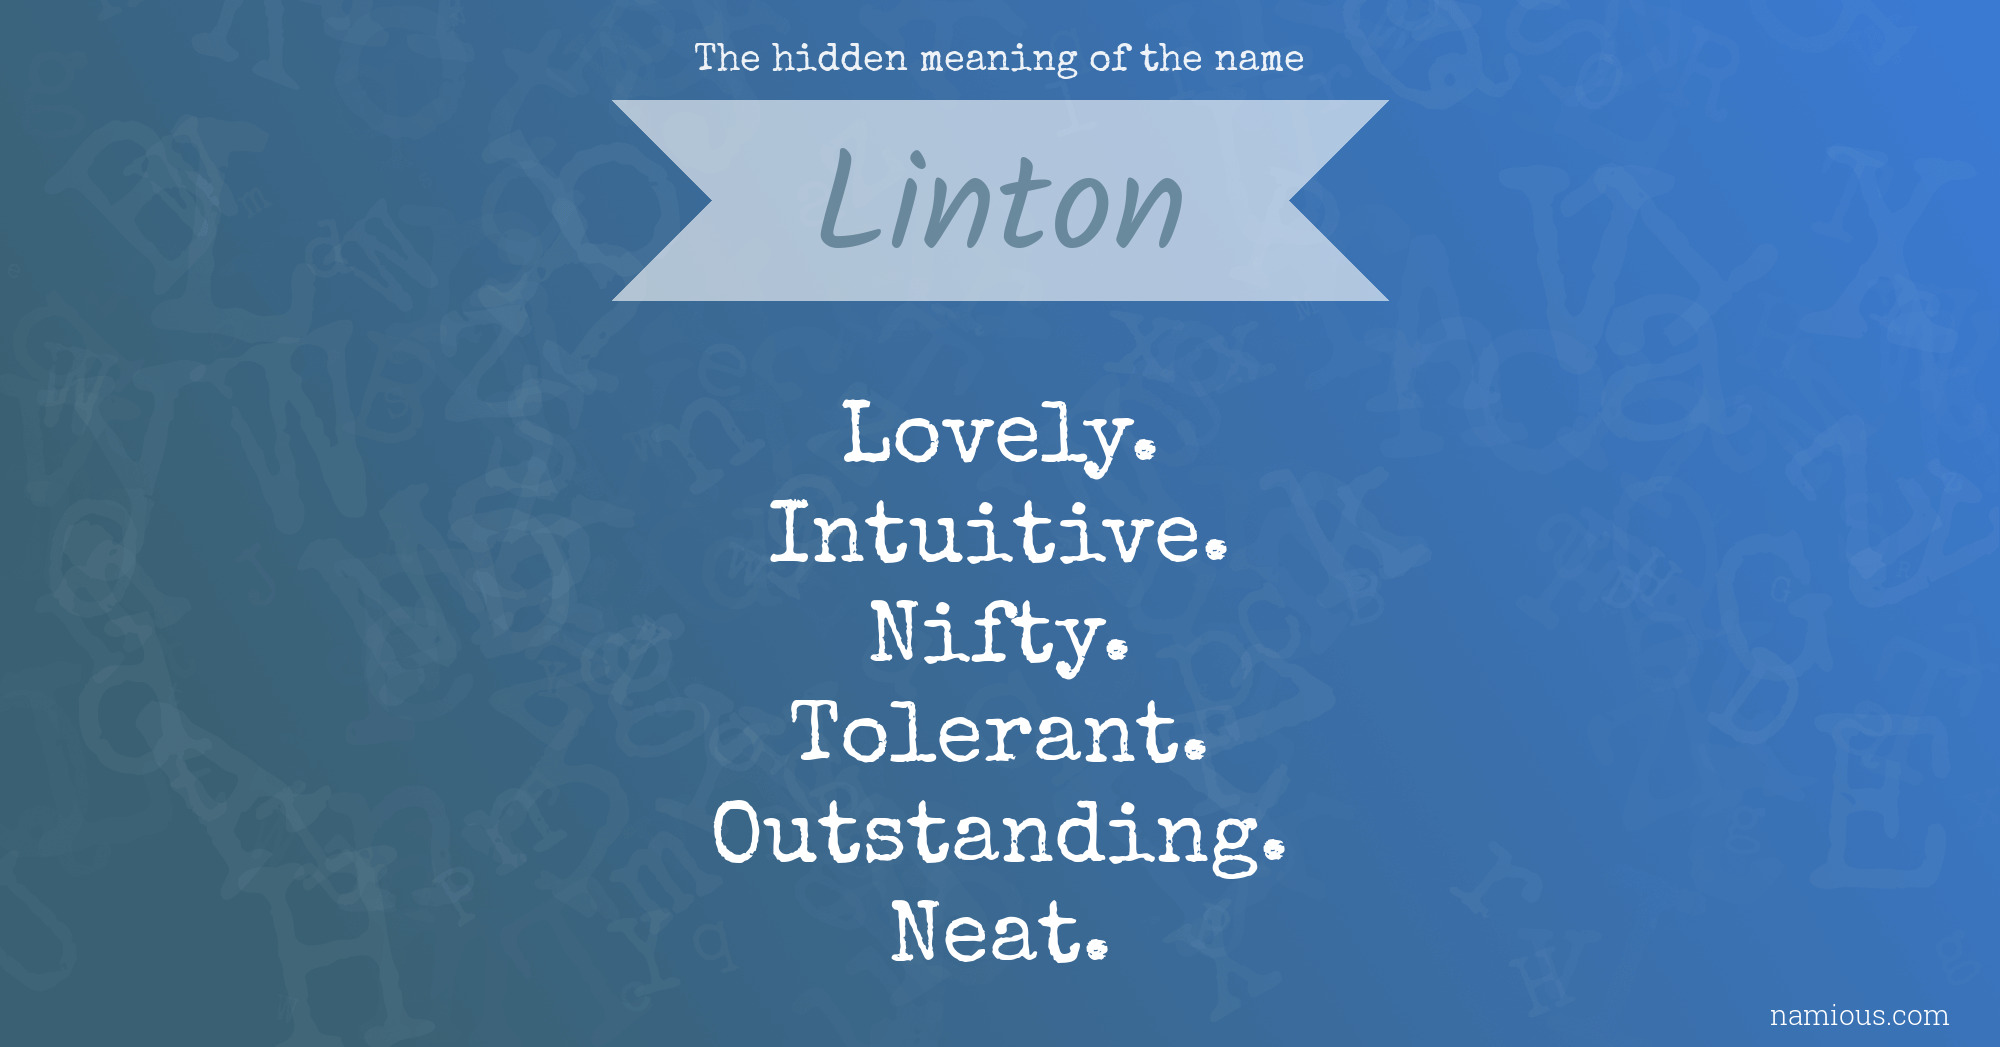 The hidden meaning of the name Linton